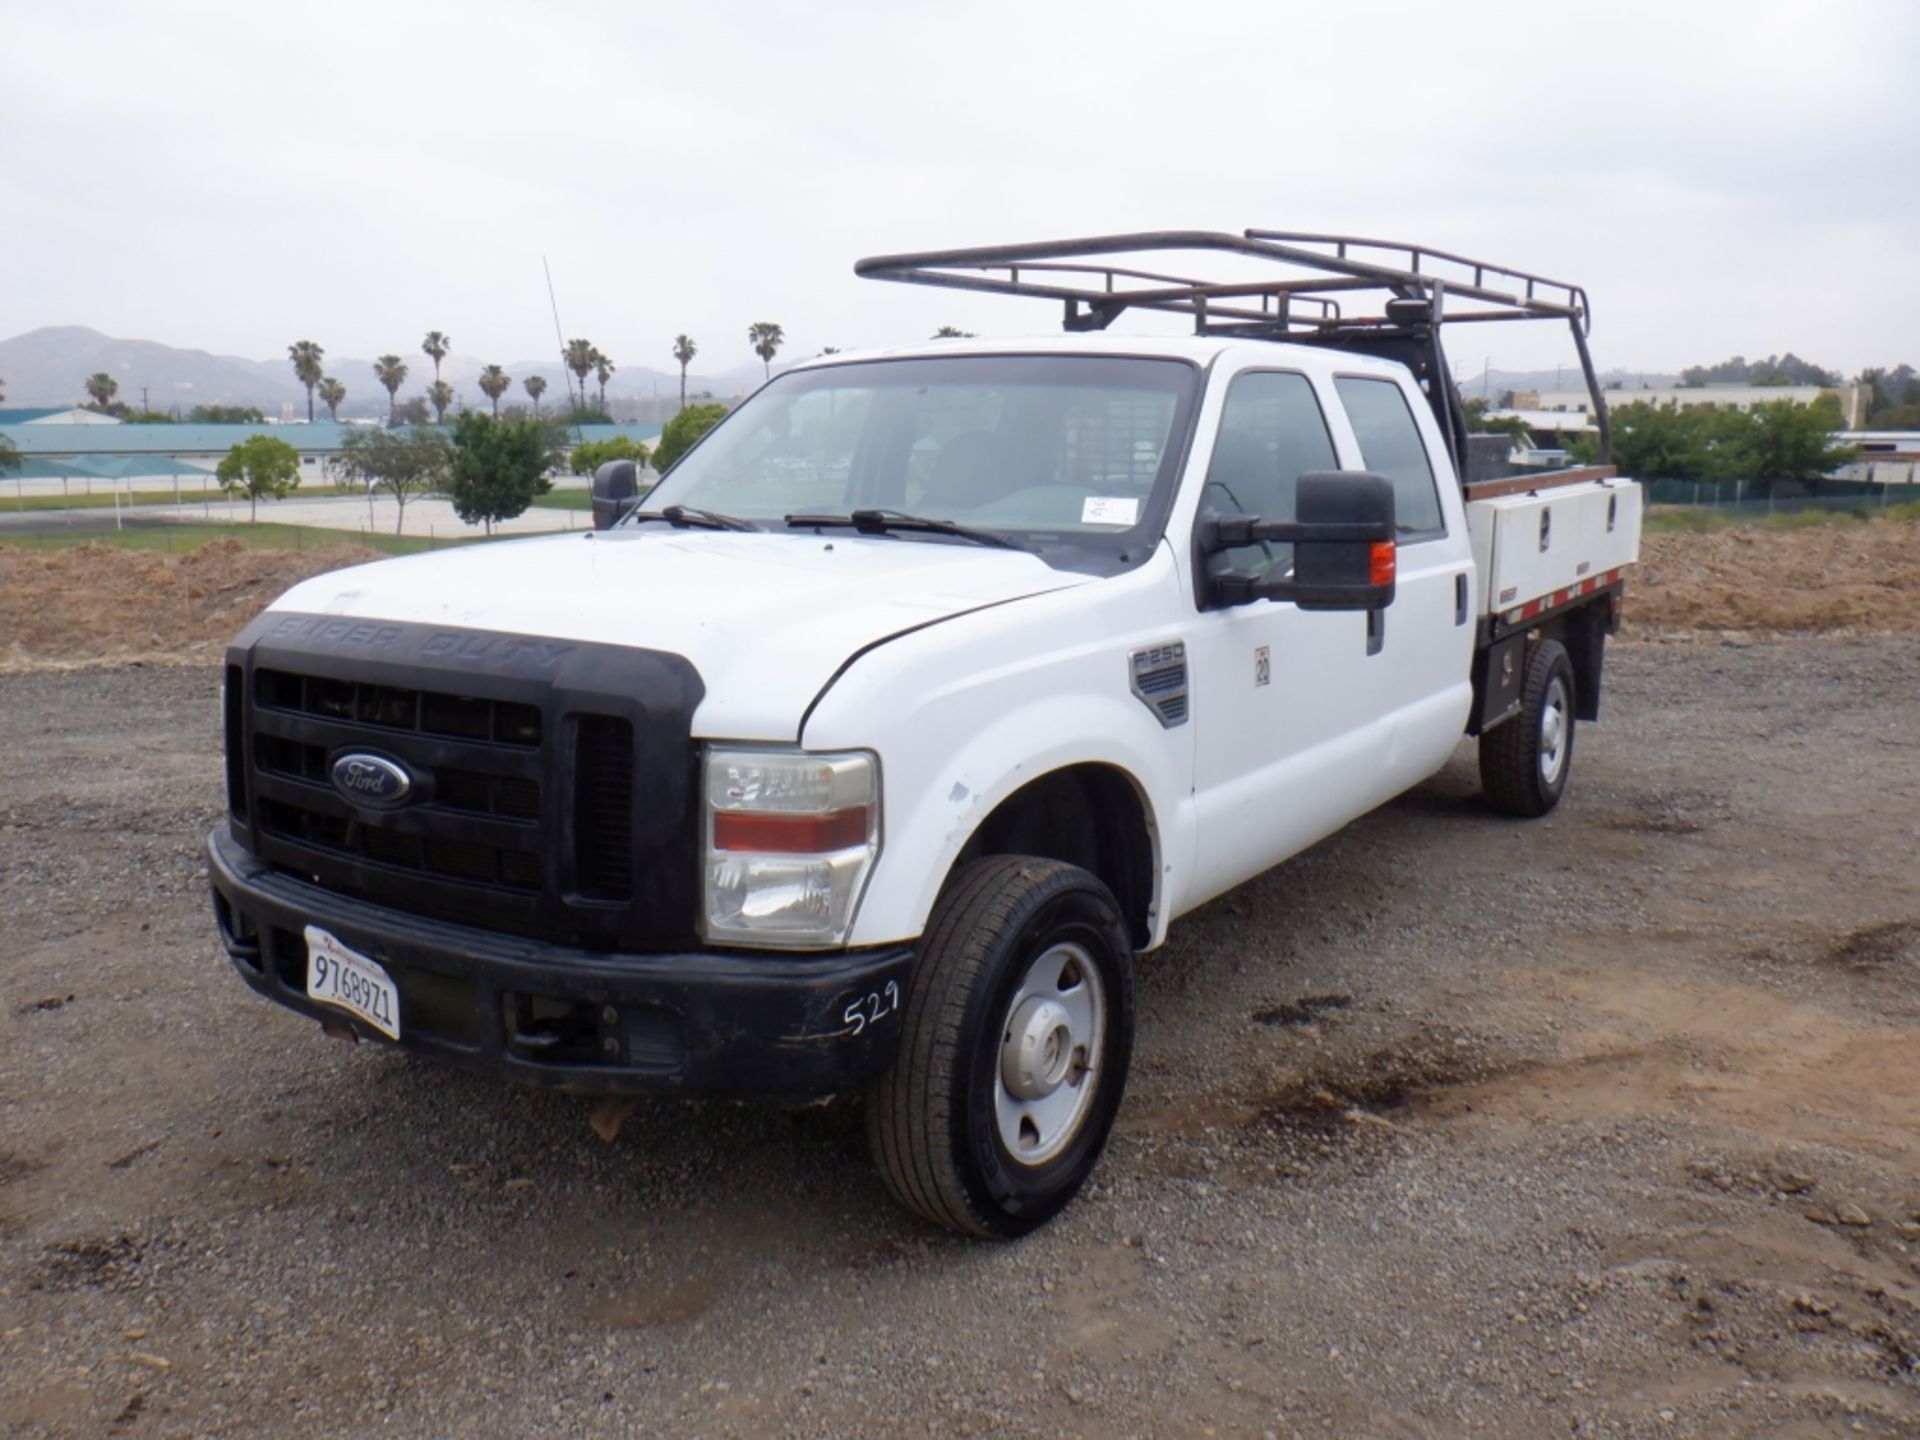 2010 Ford F250 Crew Cab Flatbed Truck,